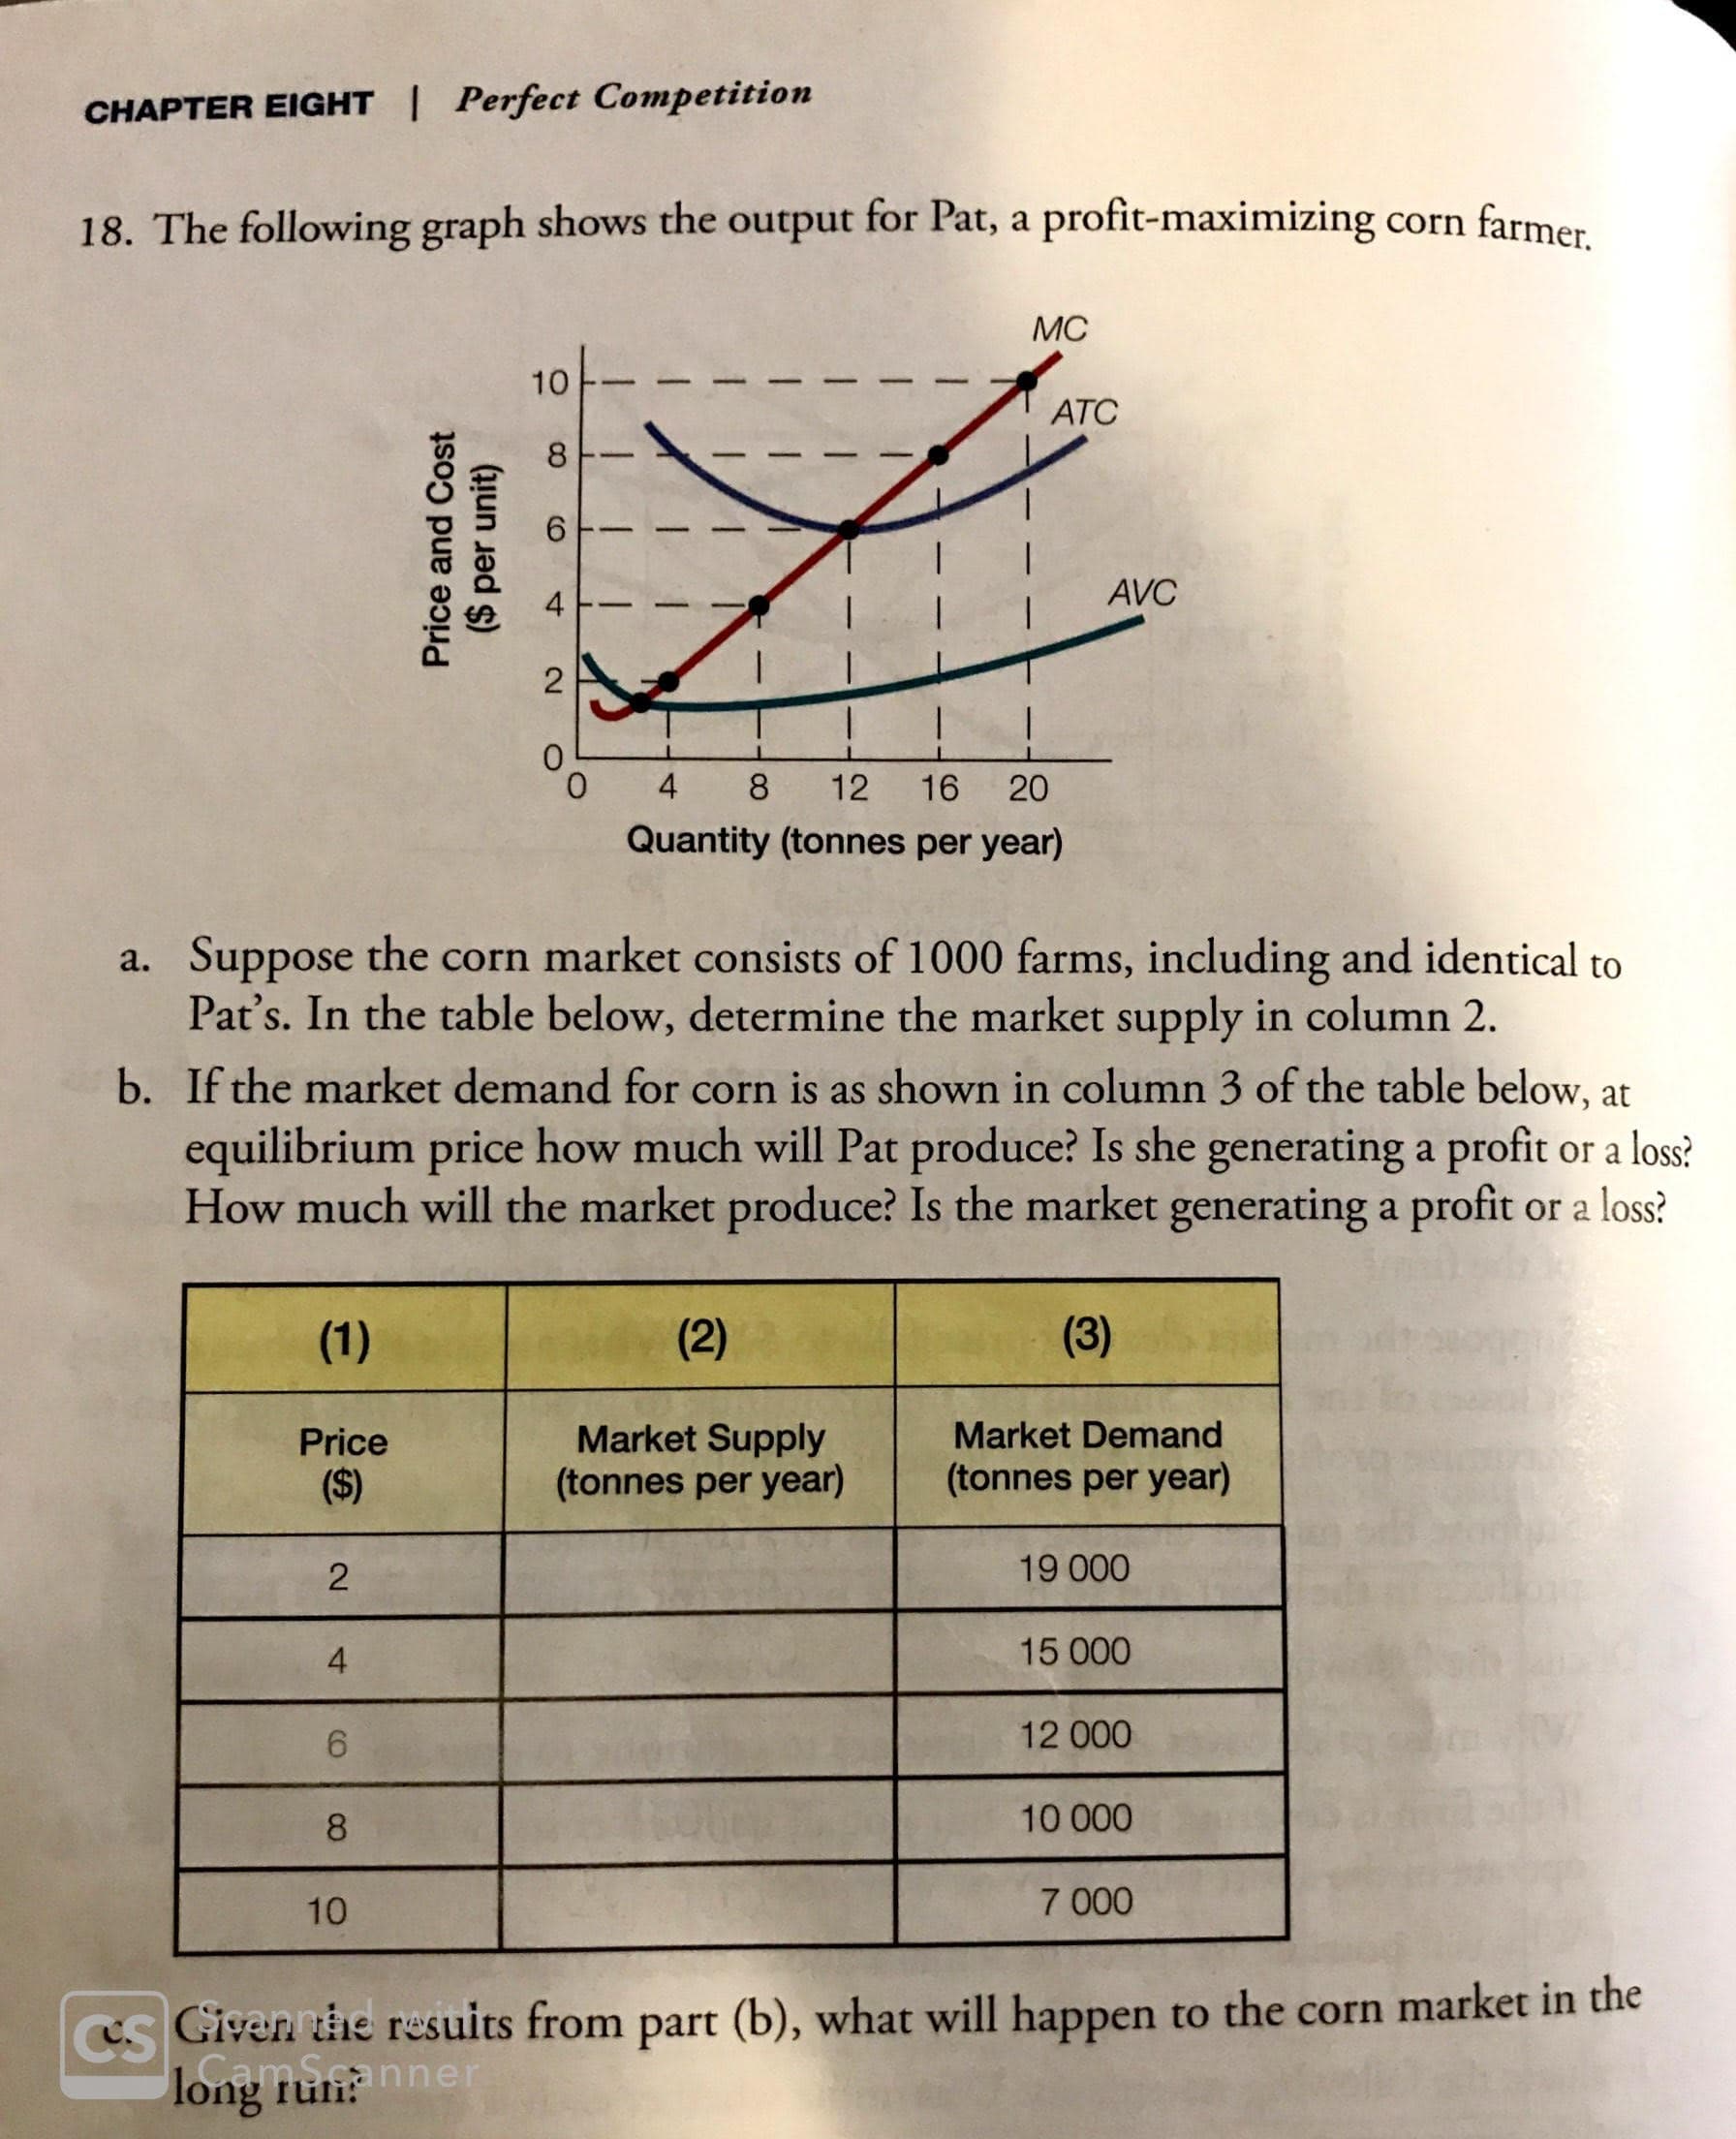 CHAPTER EIGHT I Perfect Competition
18. The following graph shows the output for Pat, a profit-maximizing corn farmer
МC
АТC
8
1
AVC
2
I
1
0
4
8
16
12
20
Quantity (tonnes per year)
a. Suppose the corn market consists of 1000 farms, including and identical to
Pat's. In the table below, determine the market supply in column 2
b. If the market demand for corn is as shown in column 3 of the table below, at
equilibrium price how much will Pat produce? Is she generating a profit or a loss?
How much will the market produce? Is the market generating a profit or a loss?
(3)
(2)
(1)
Market Supply
(tonnes per year)
Market Demand
Price
(tonnes per year)
($)
19 O00
2
15 000
4
12 000
6
10 000
8
7 000
10
Givennhe resuits from part (b), what will happen to the corn market in the
long tun nner
Price and Cost
(S per unit)
10
CO
